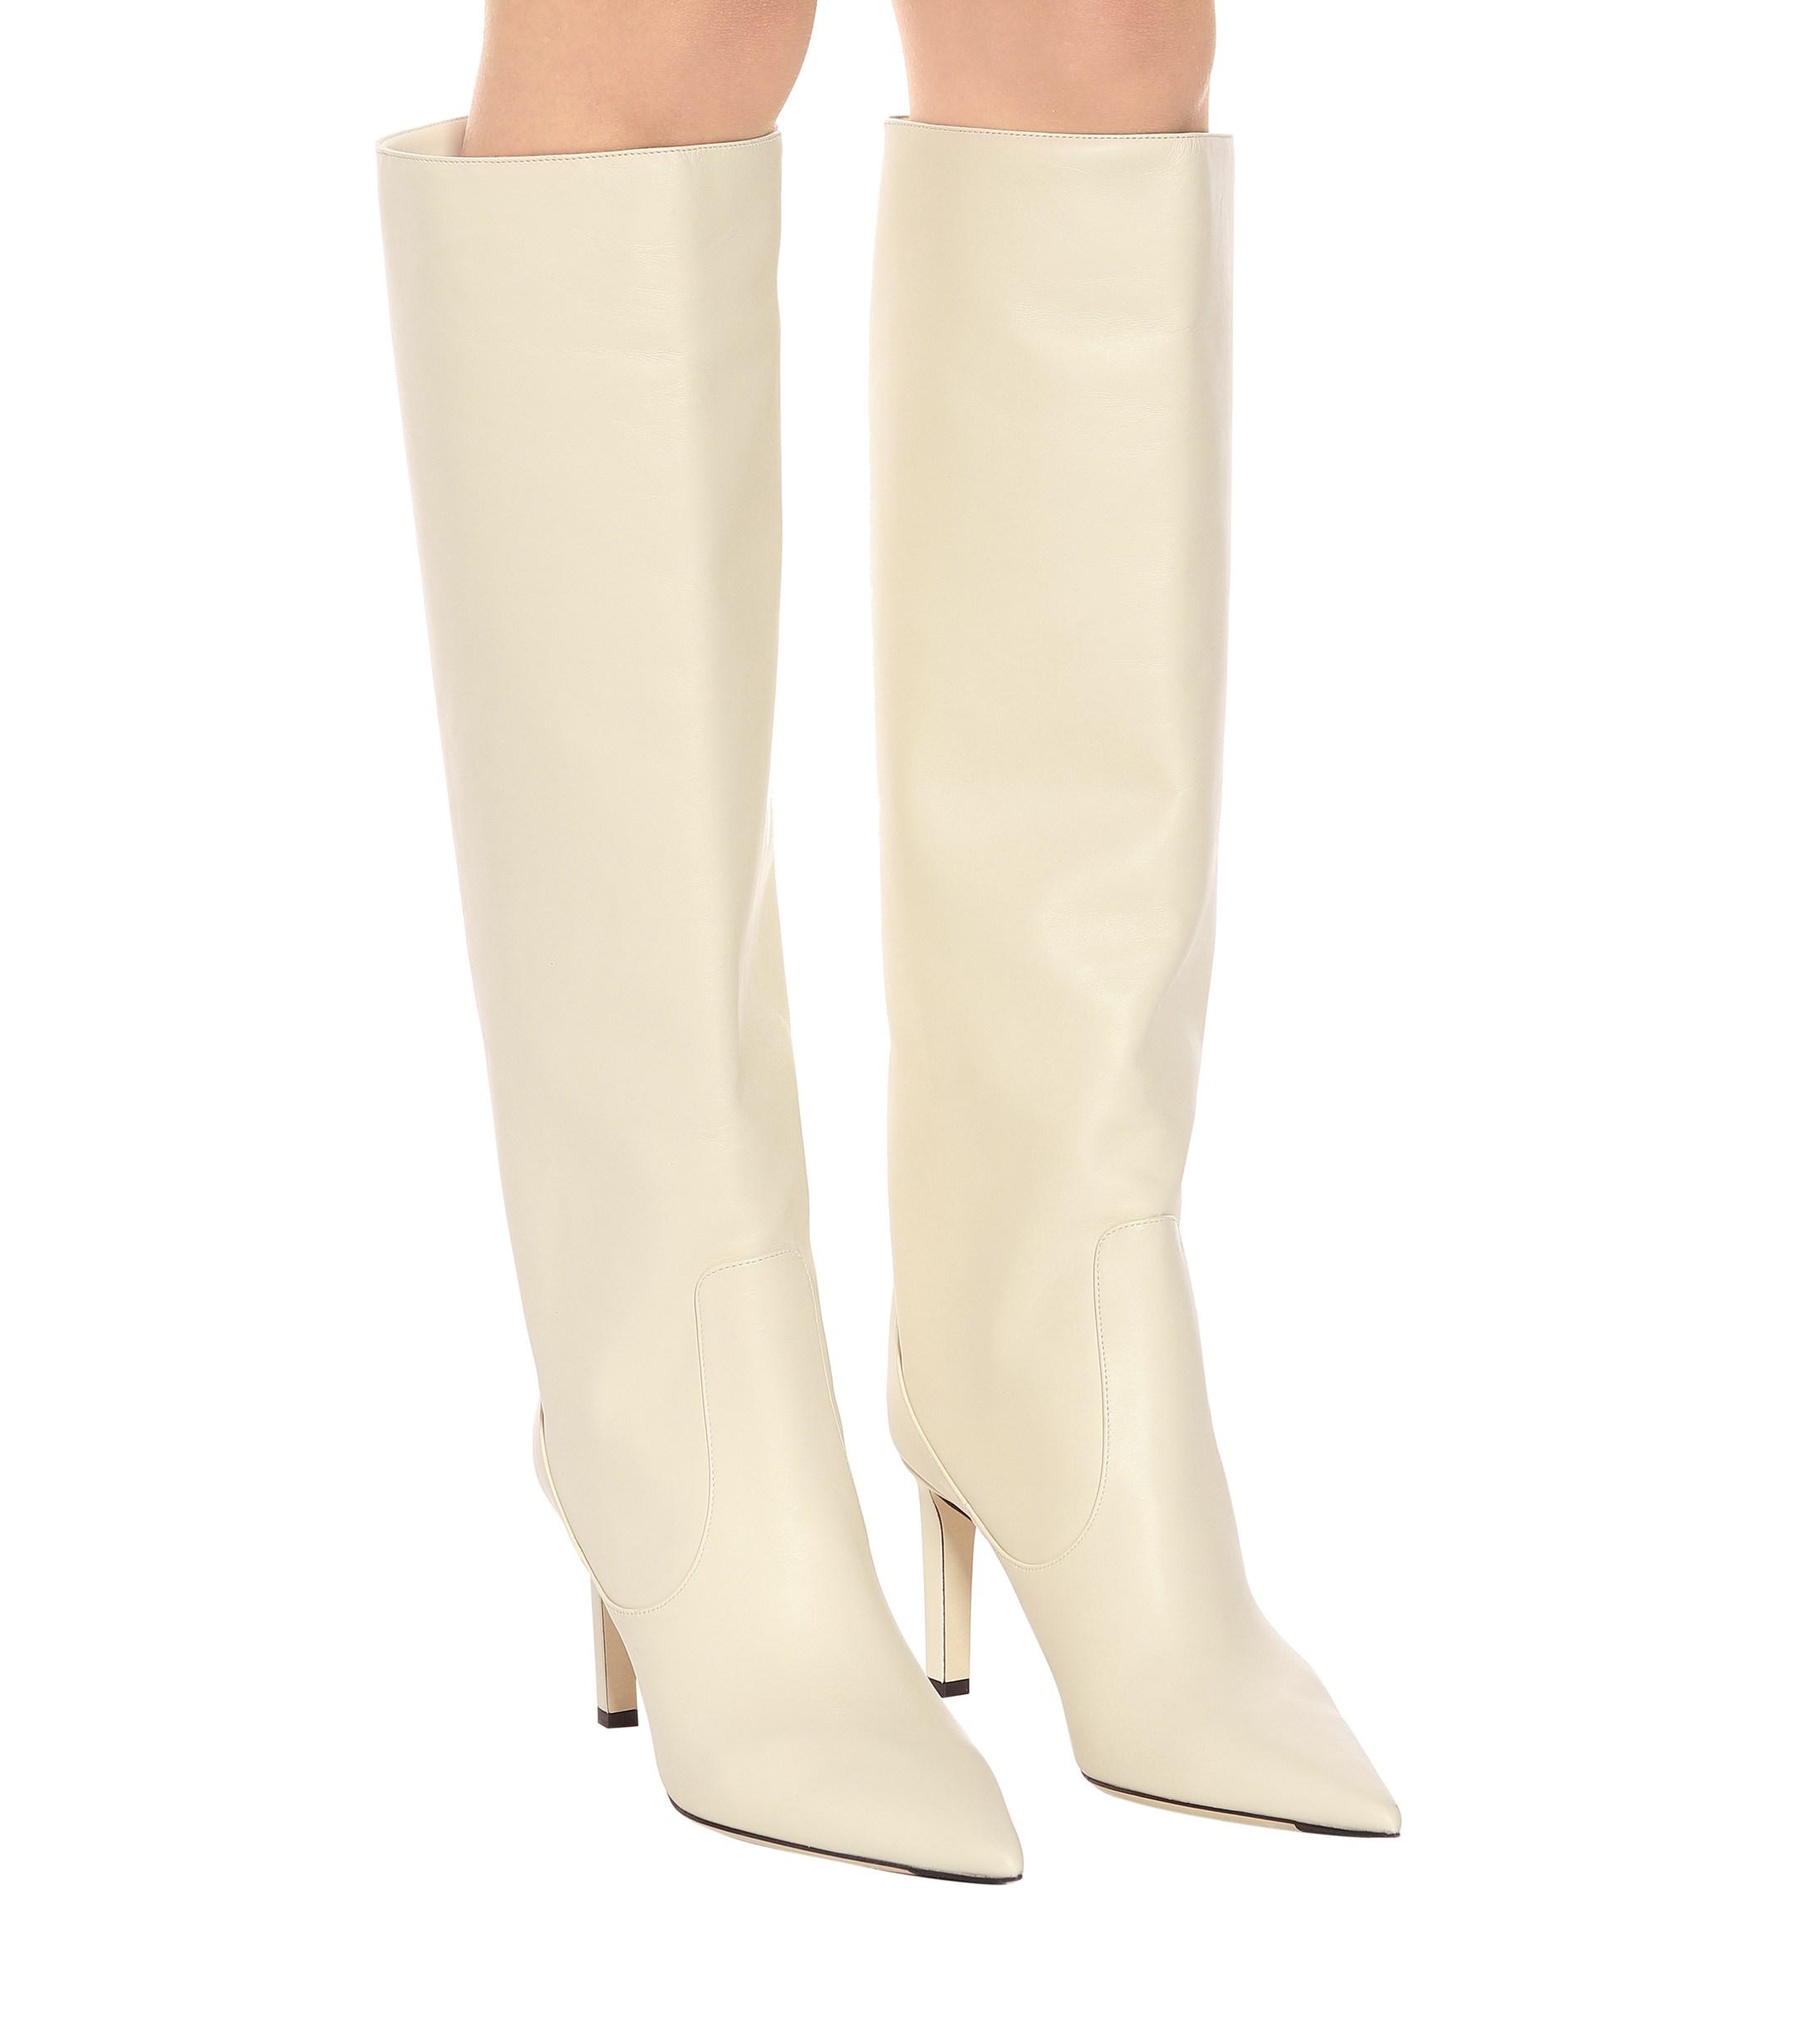 white leather boots knee high